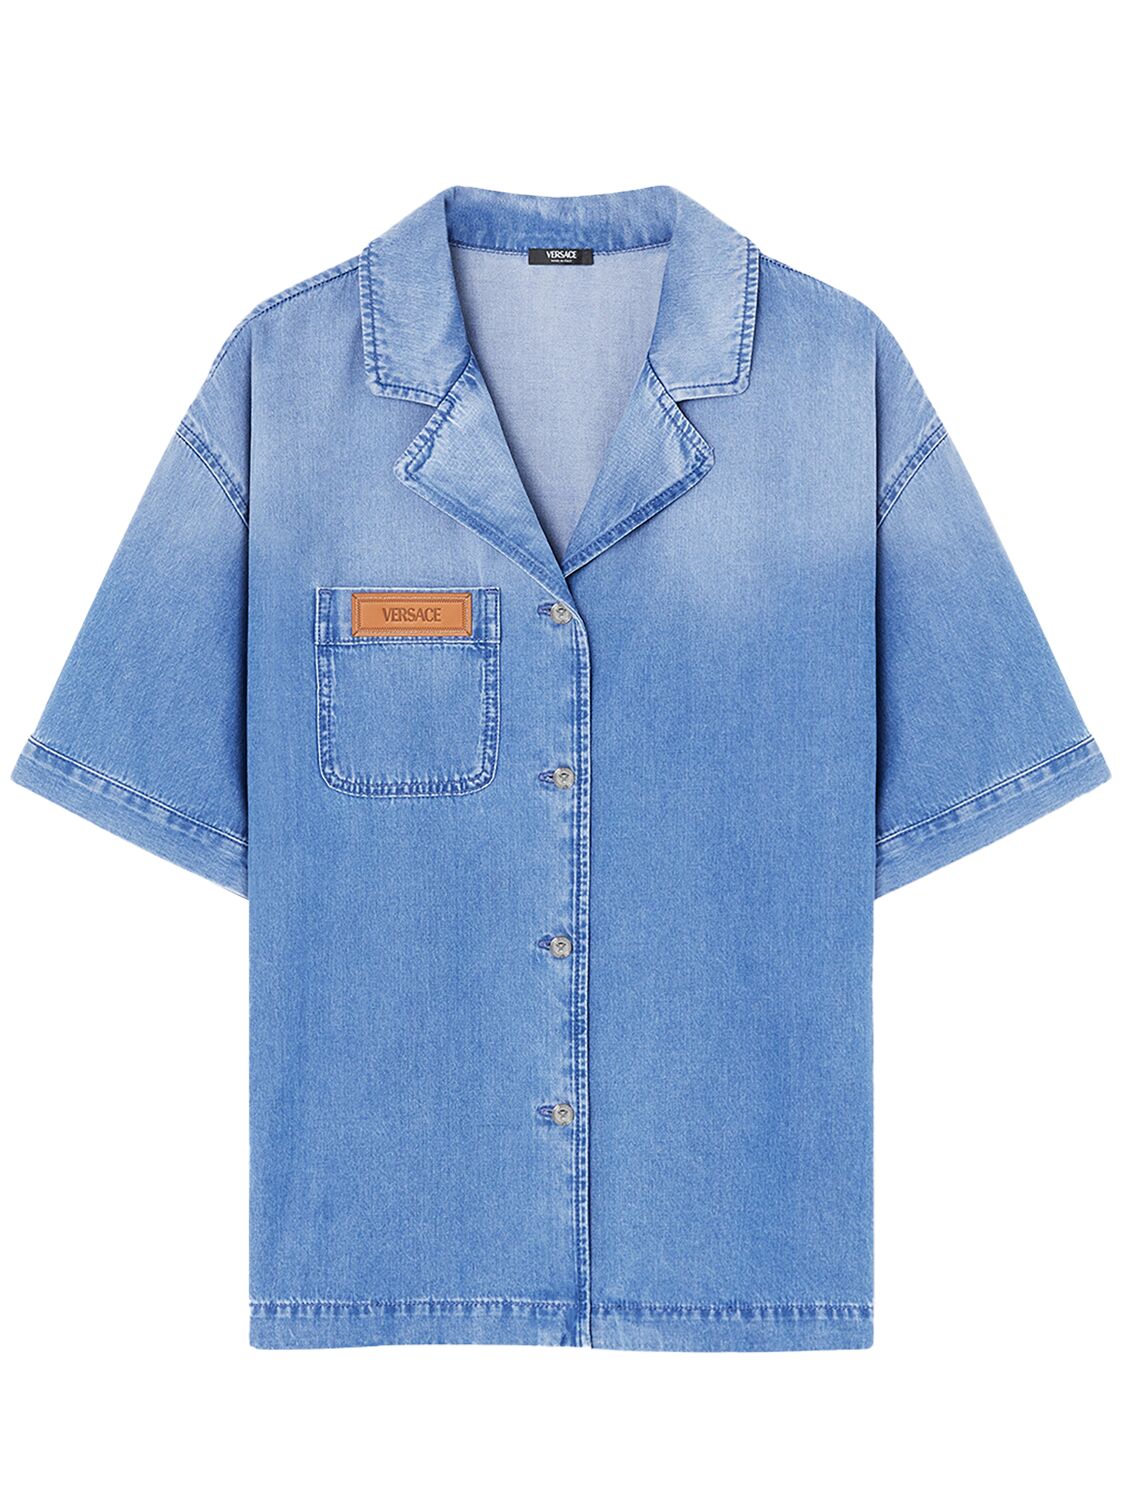 Versace Faded Denim S/s Shirt In 蓝色